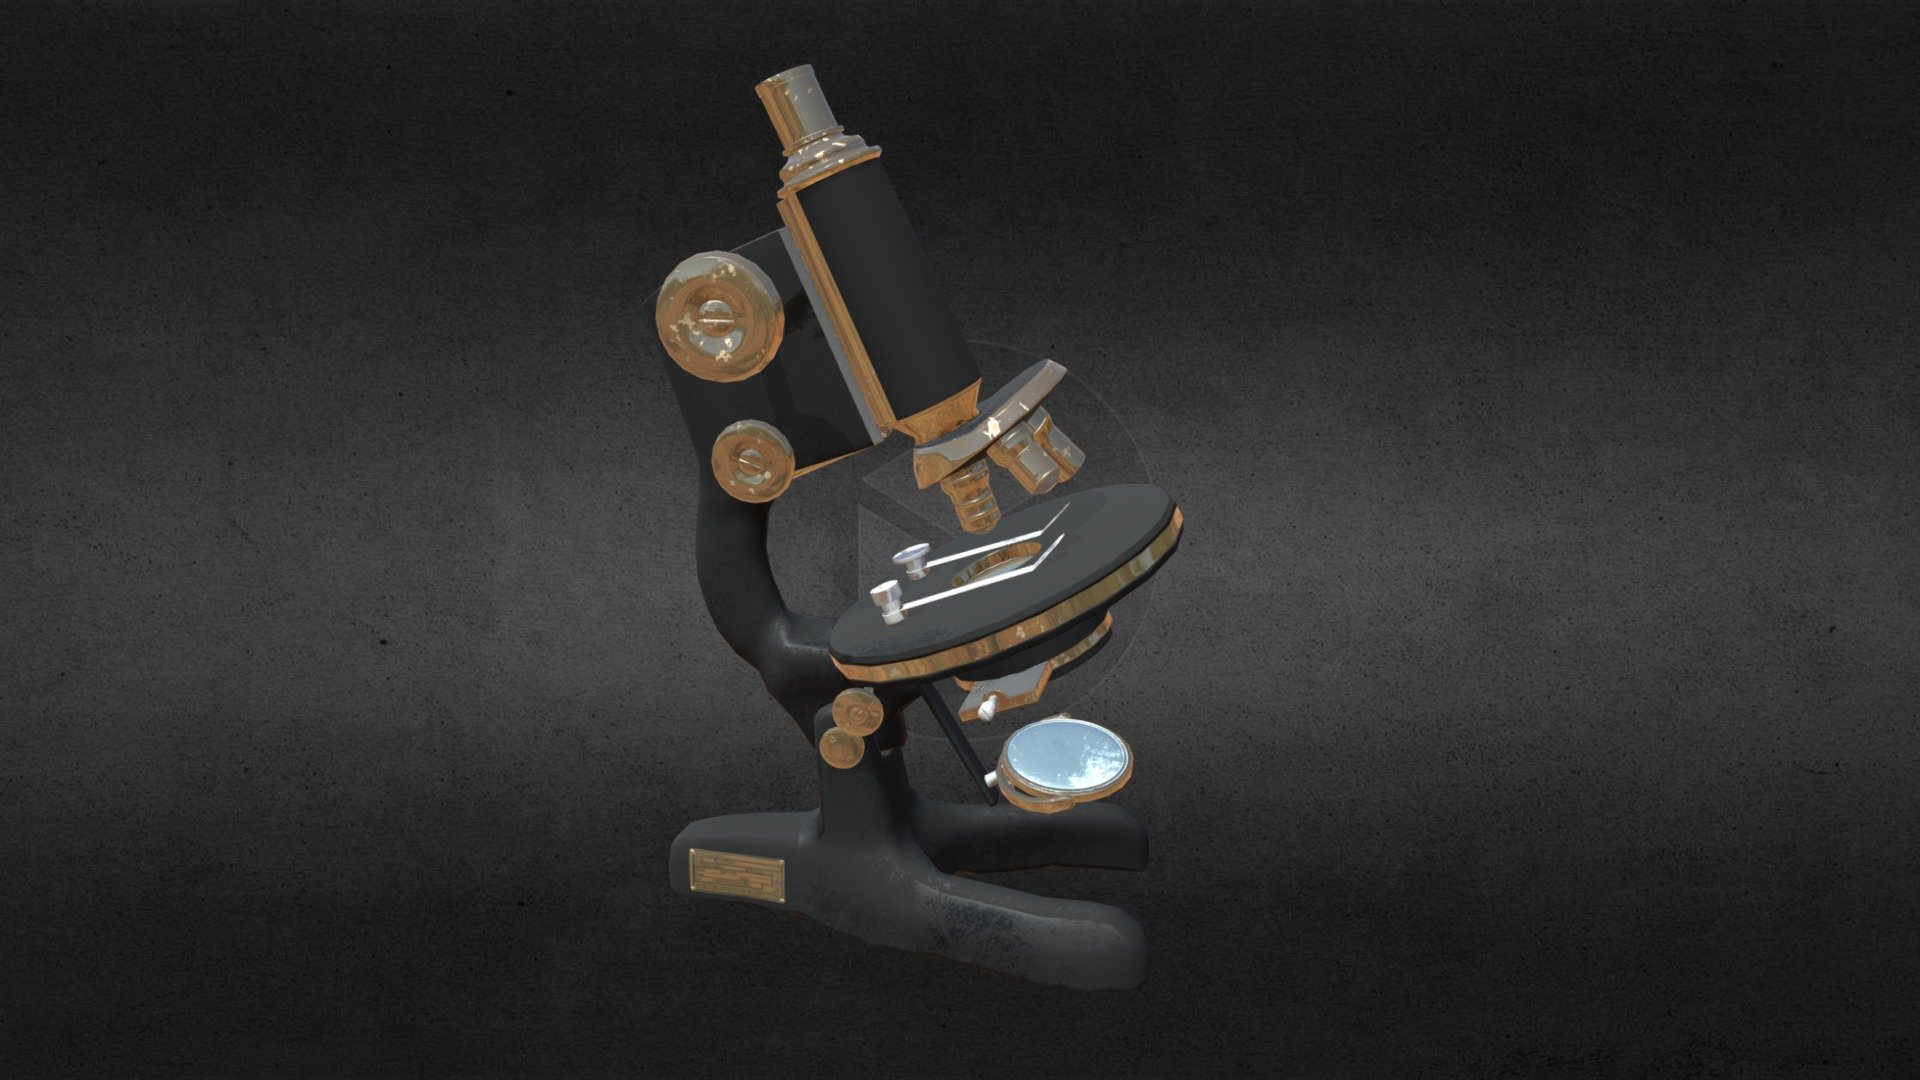 Microscope modeled in maya and textured in substance 3d model